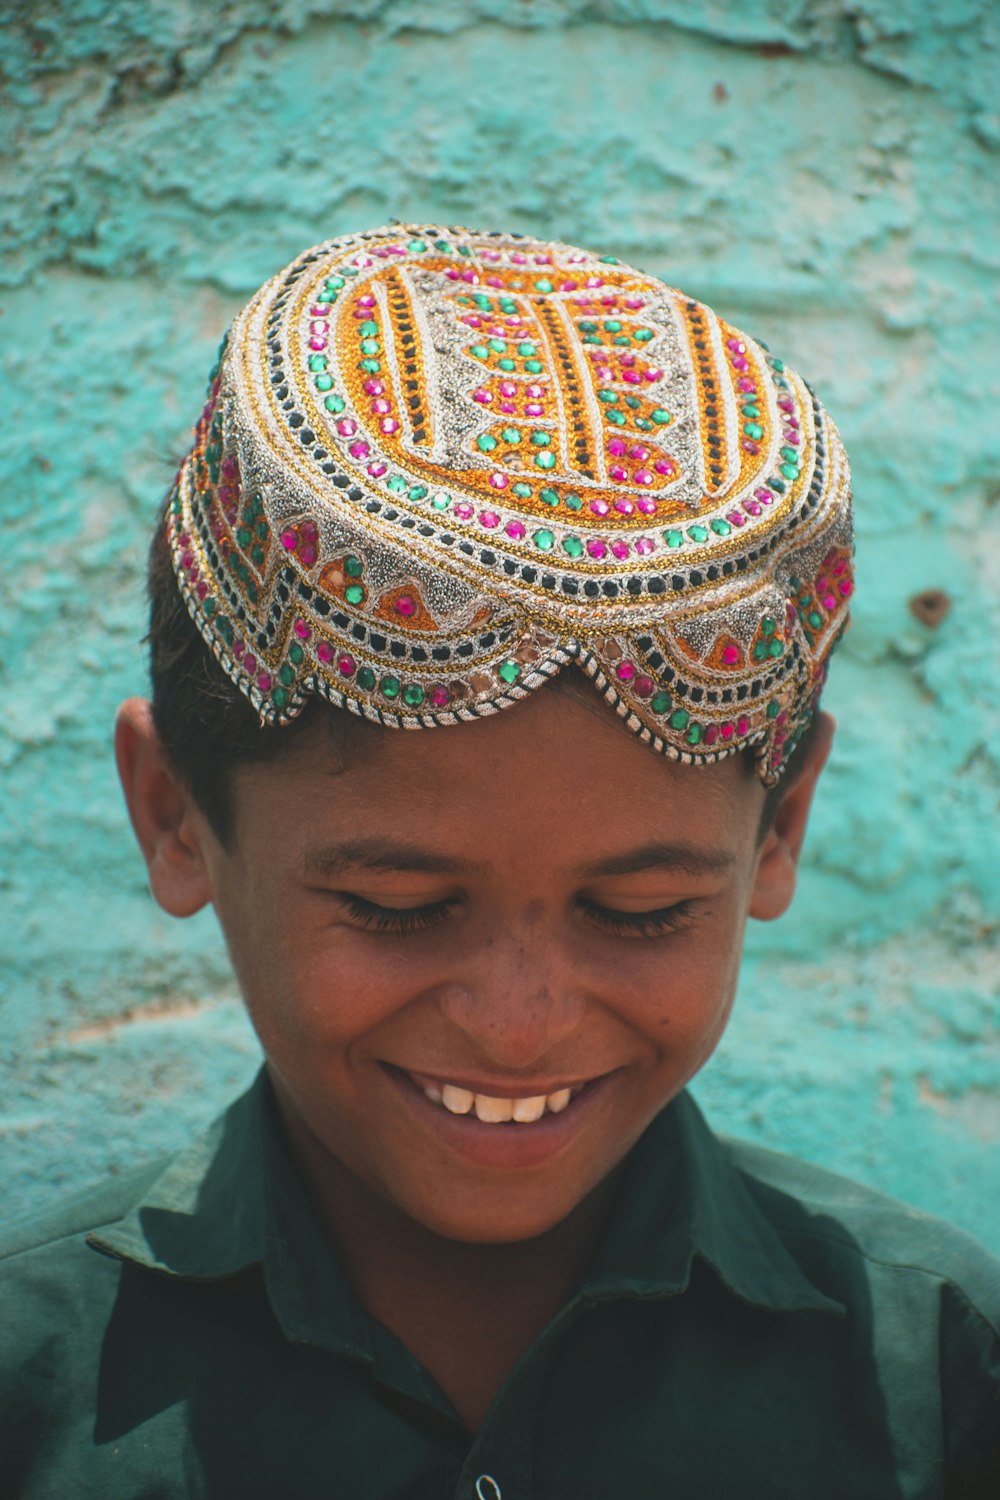 a young boy wearing a colorful head piece